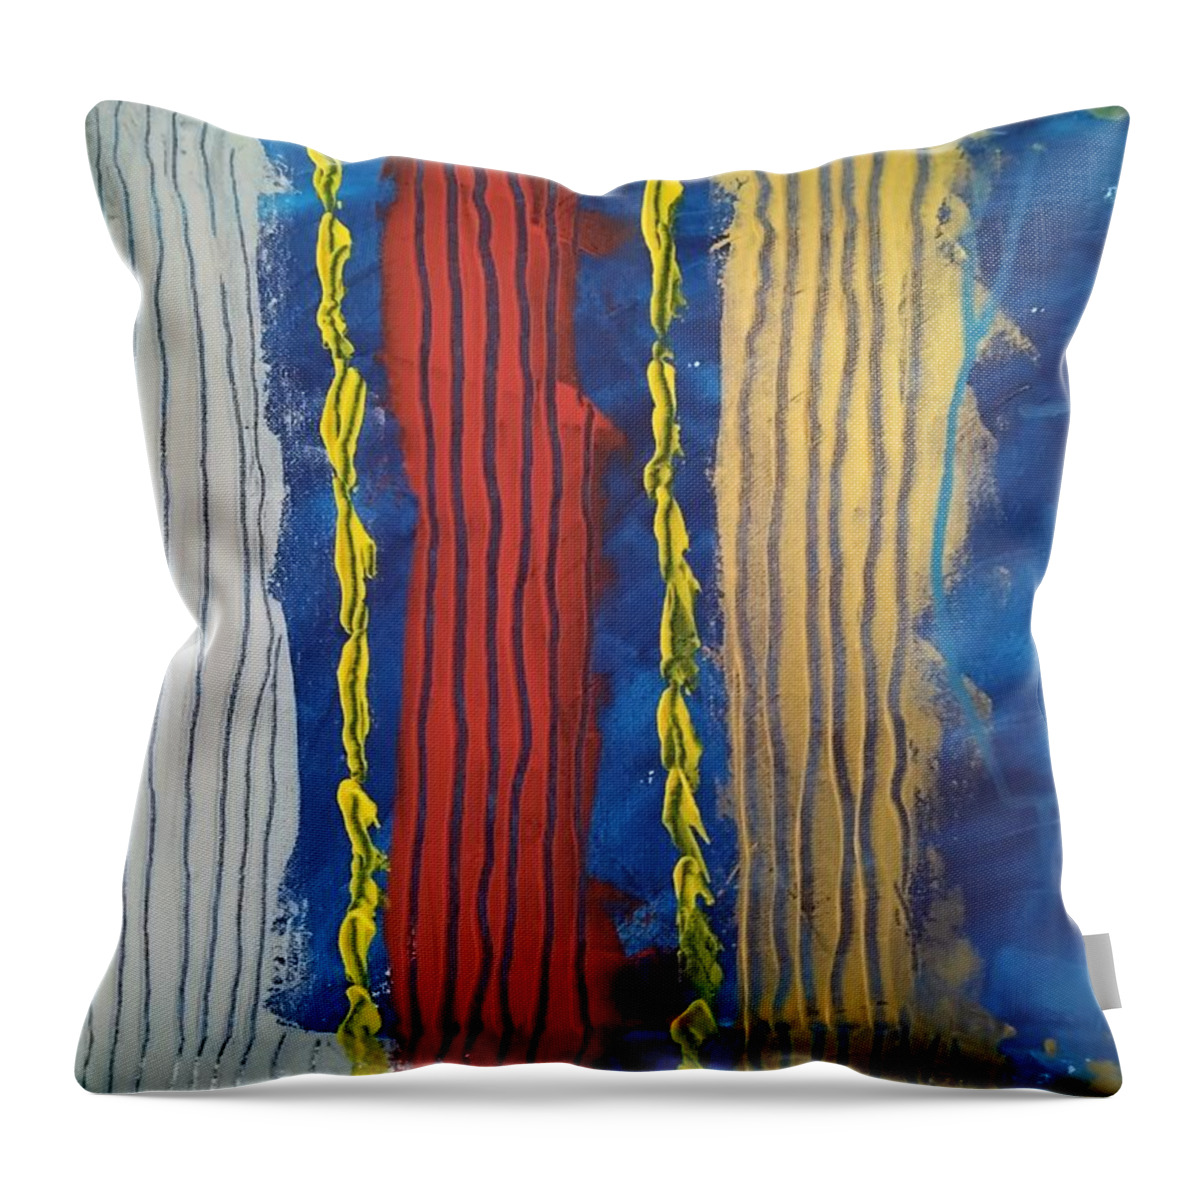  Throw Pillow featuring the painting Caos96 by Giuseppe Monti